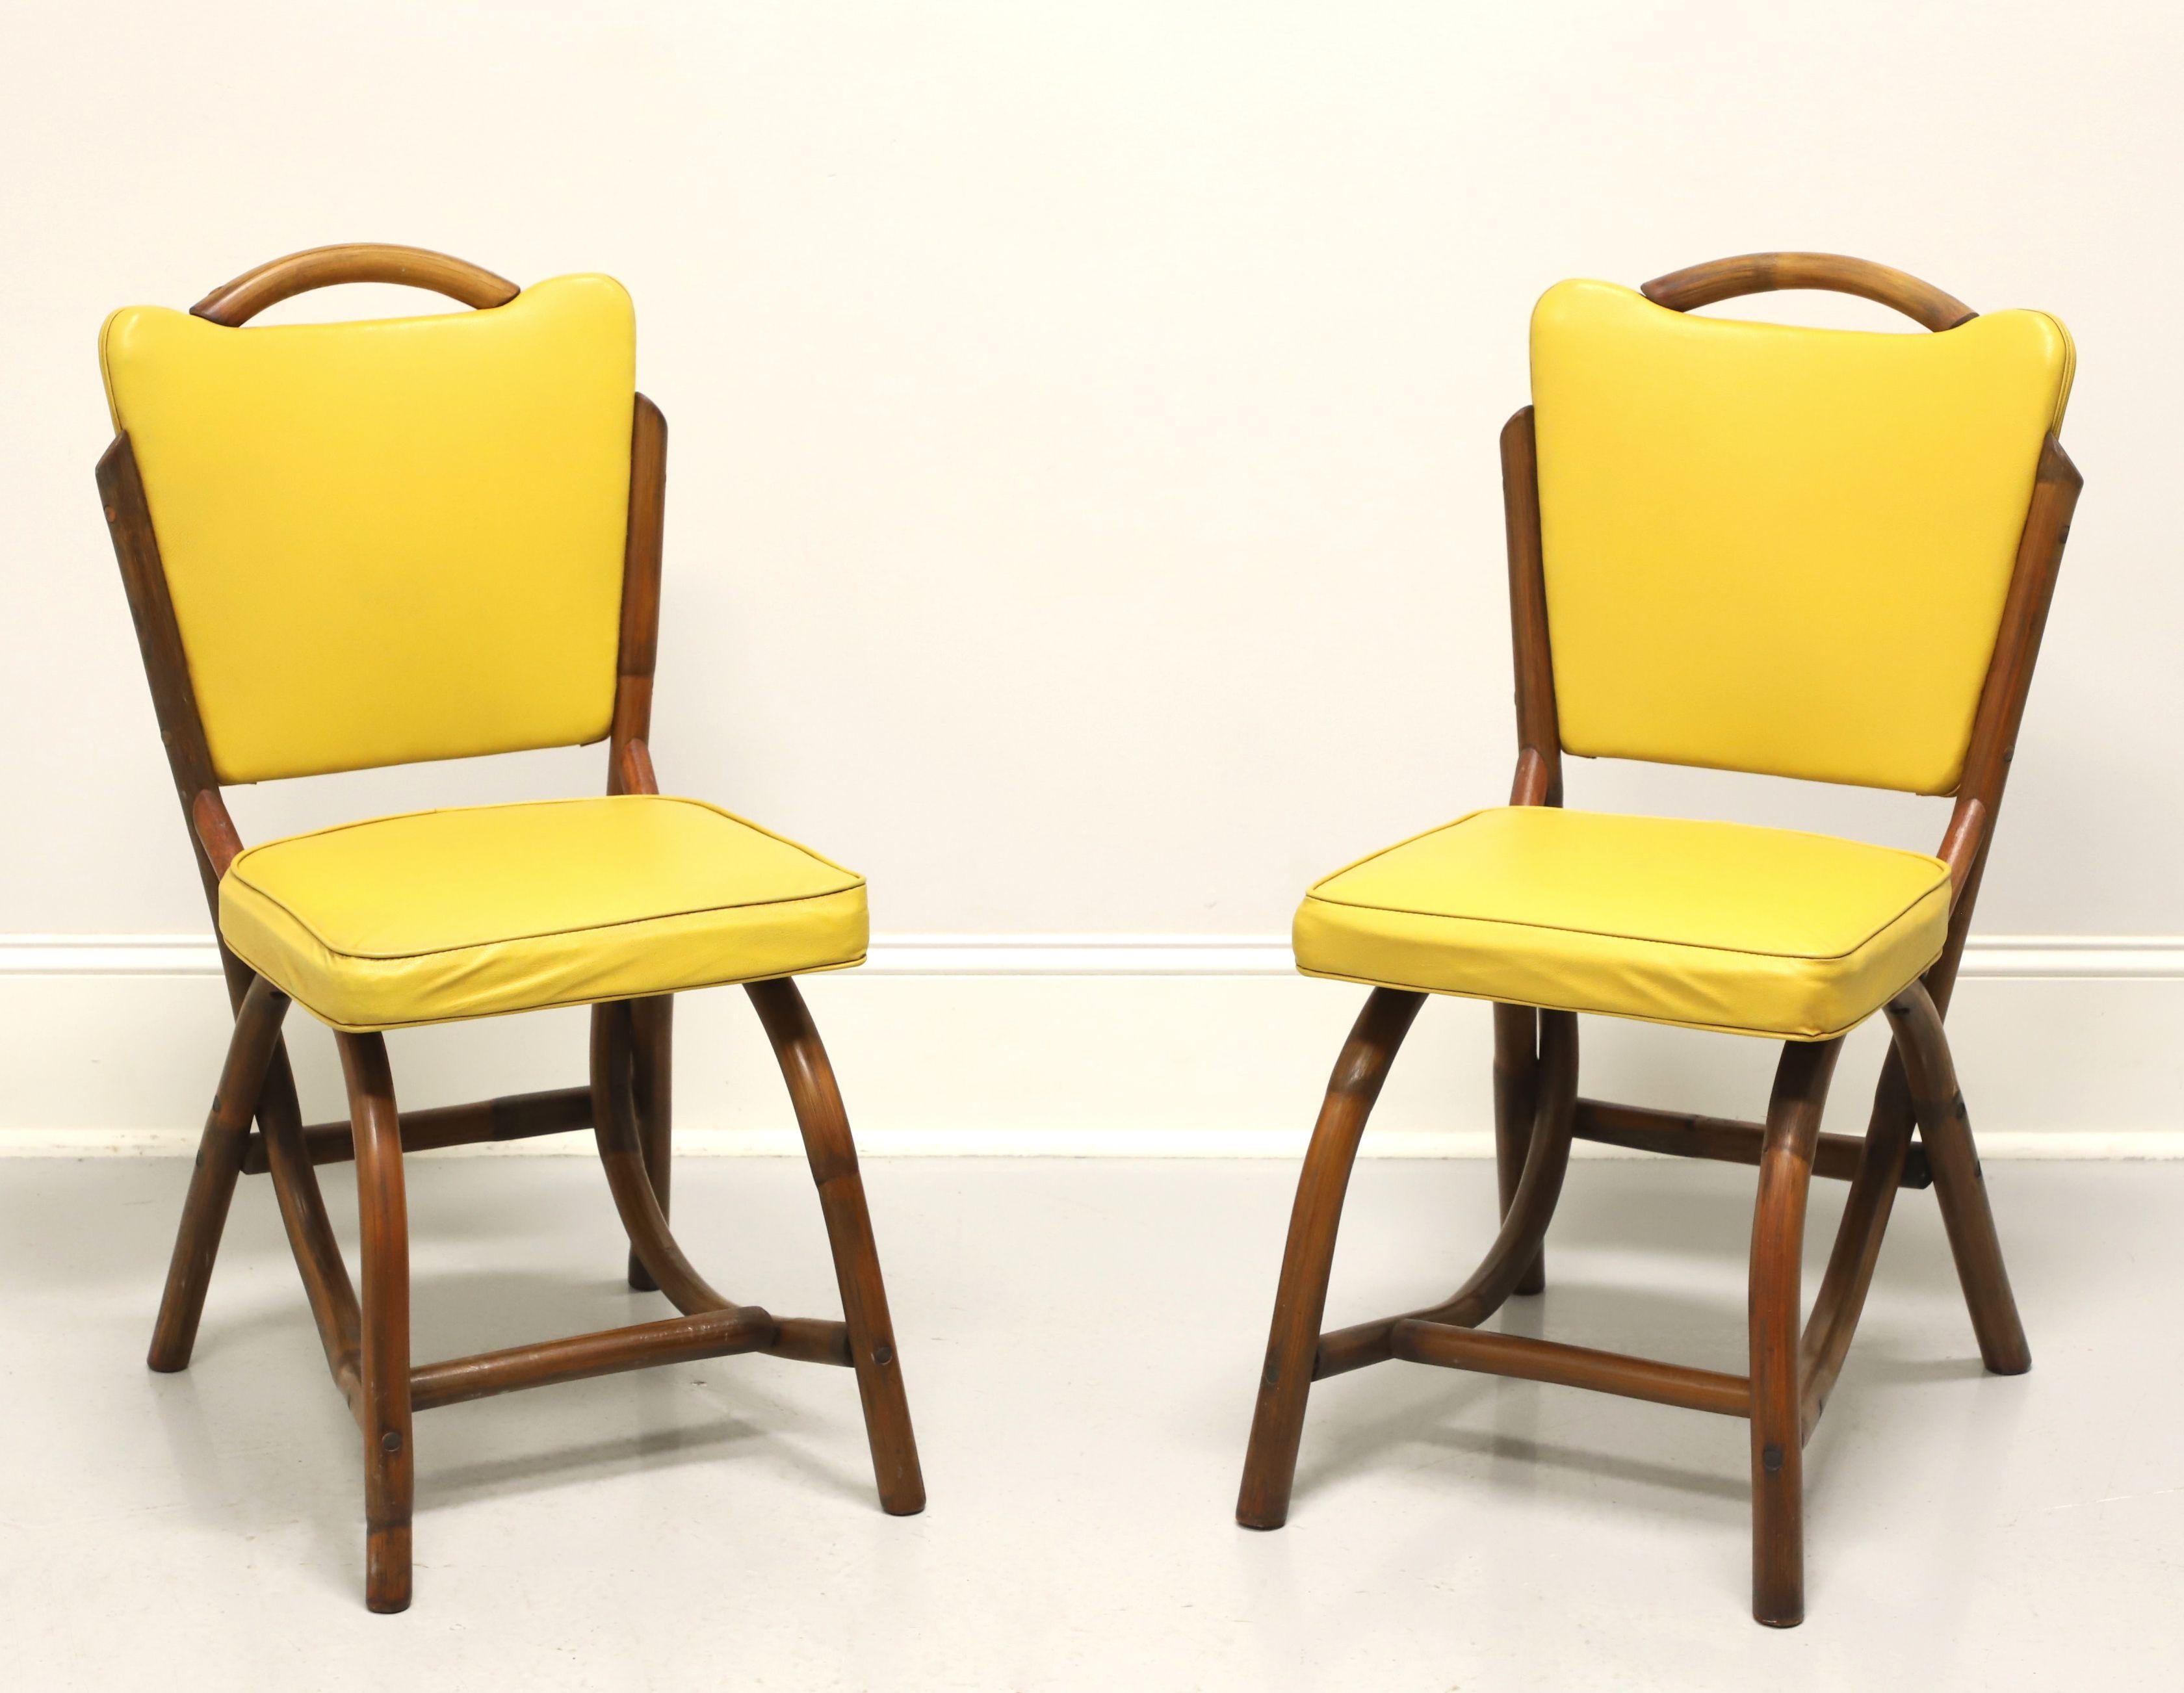 BAM-TAN 1960's Rattan Dining Side Chairs - Pair B For Sale 4